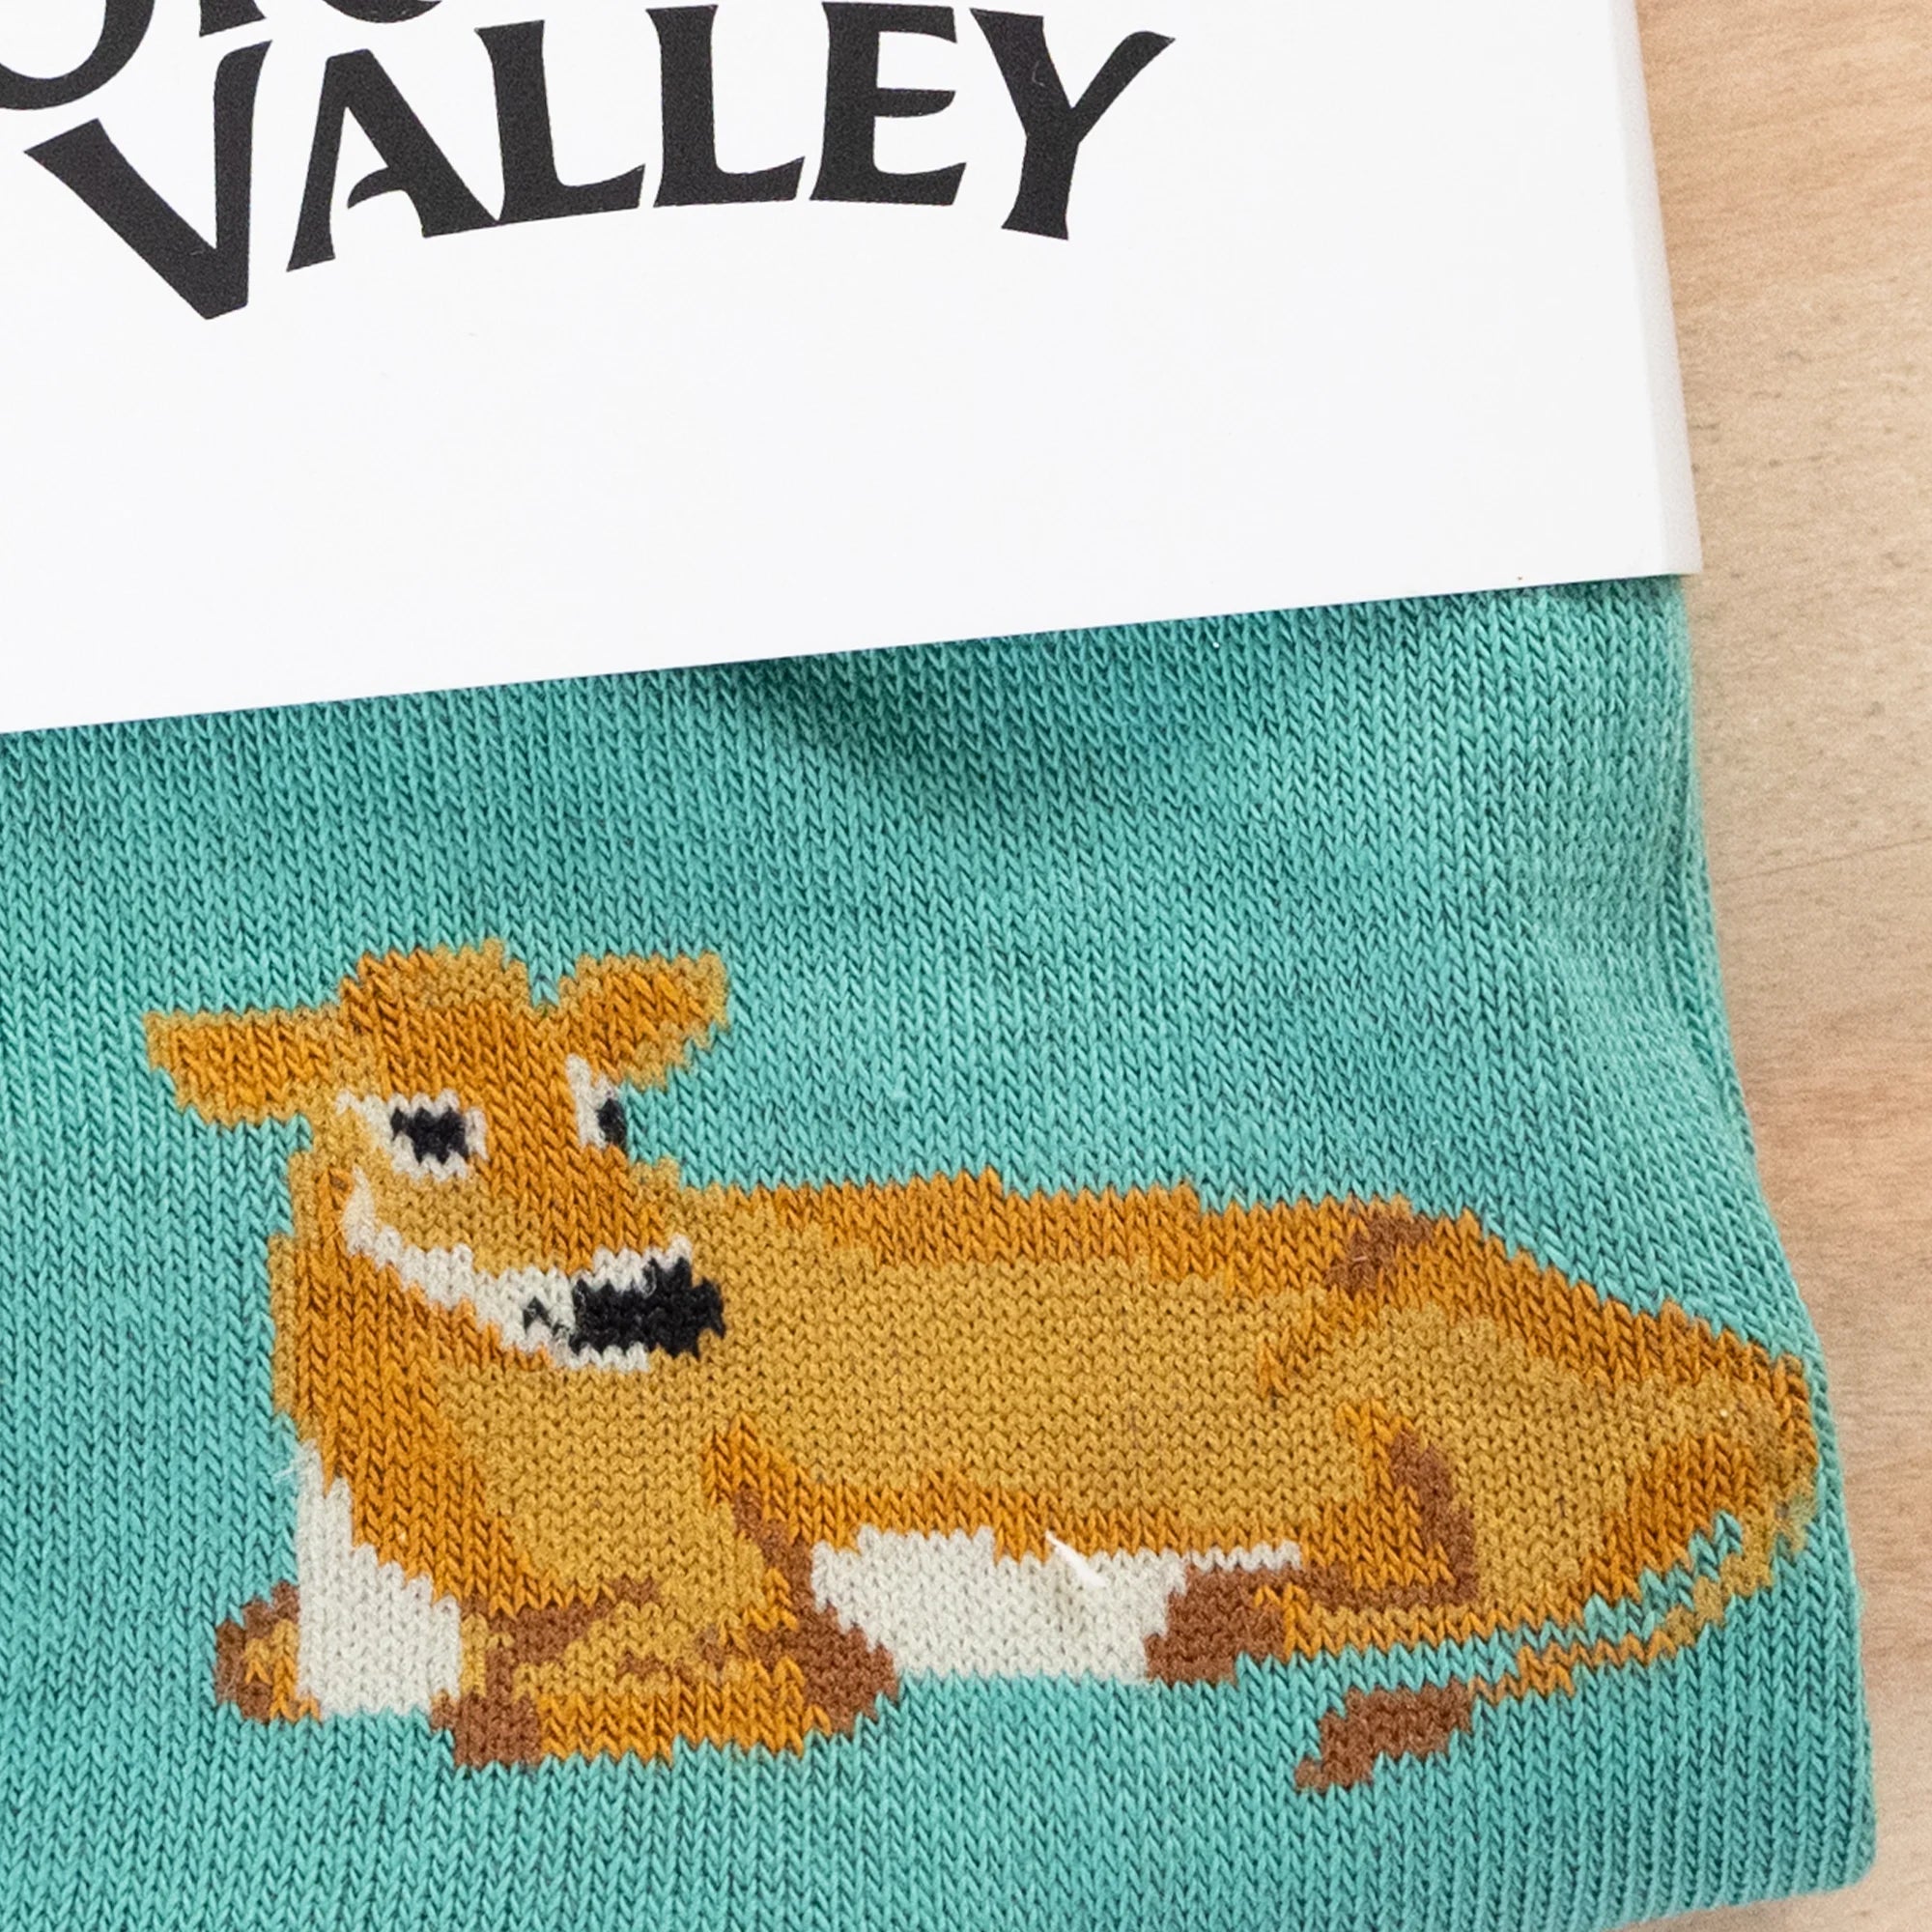 Jersey Cow Socks in Grass color